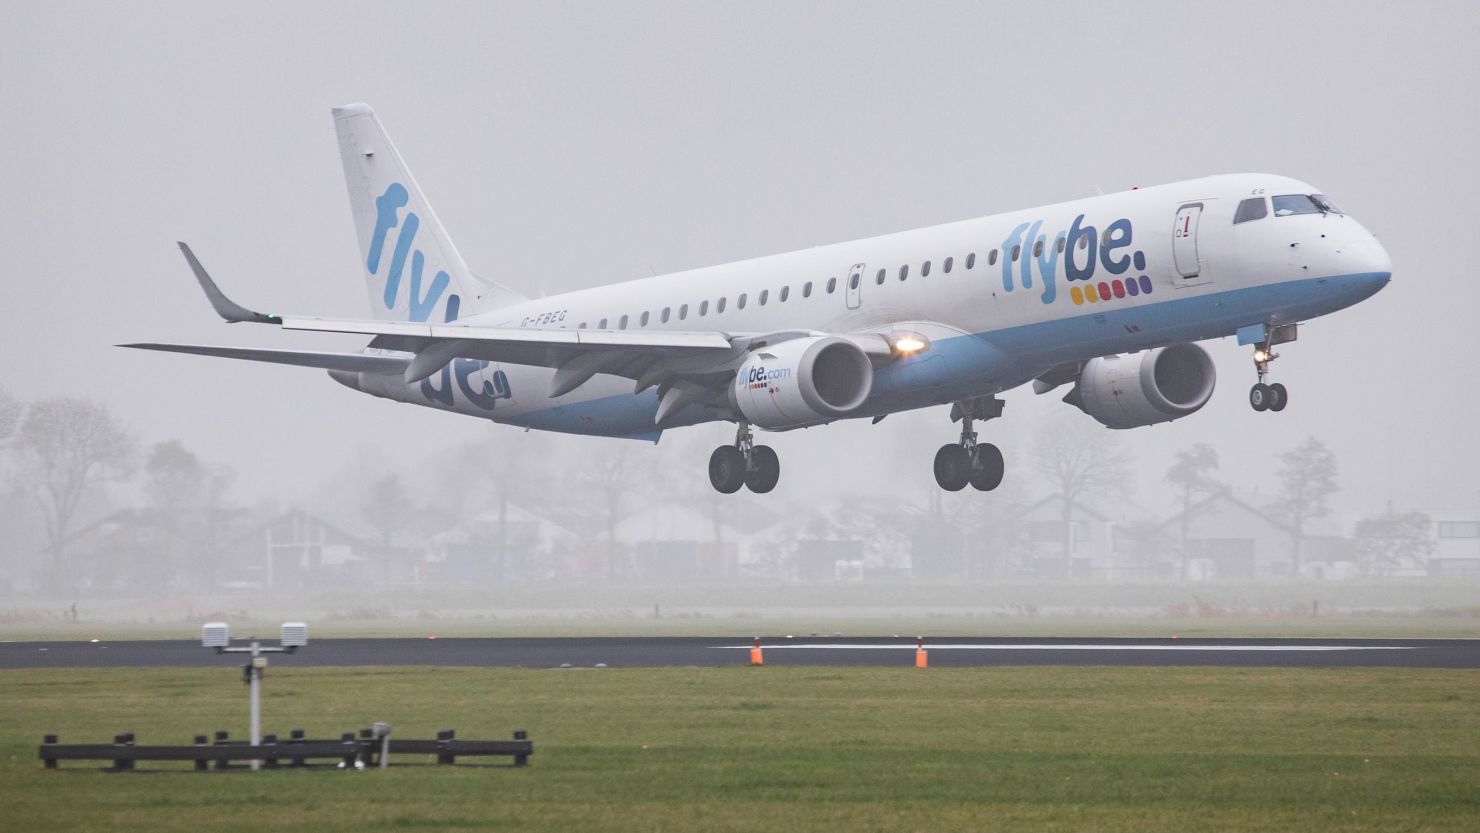 A Flybe Embraer aircraft lands at Amsterdam Schiphol International Airport.